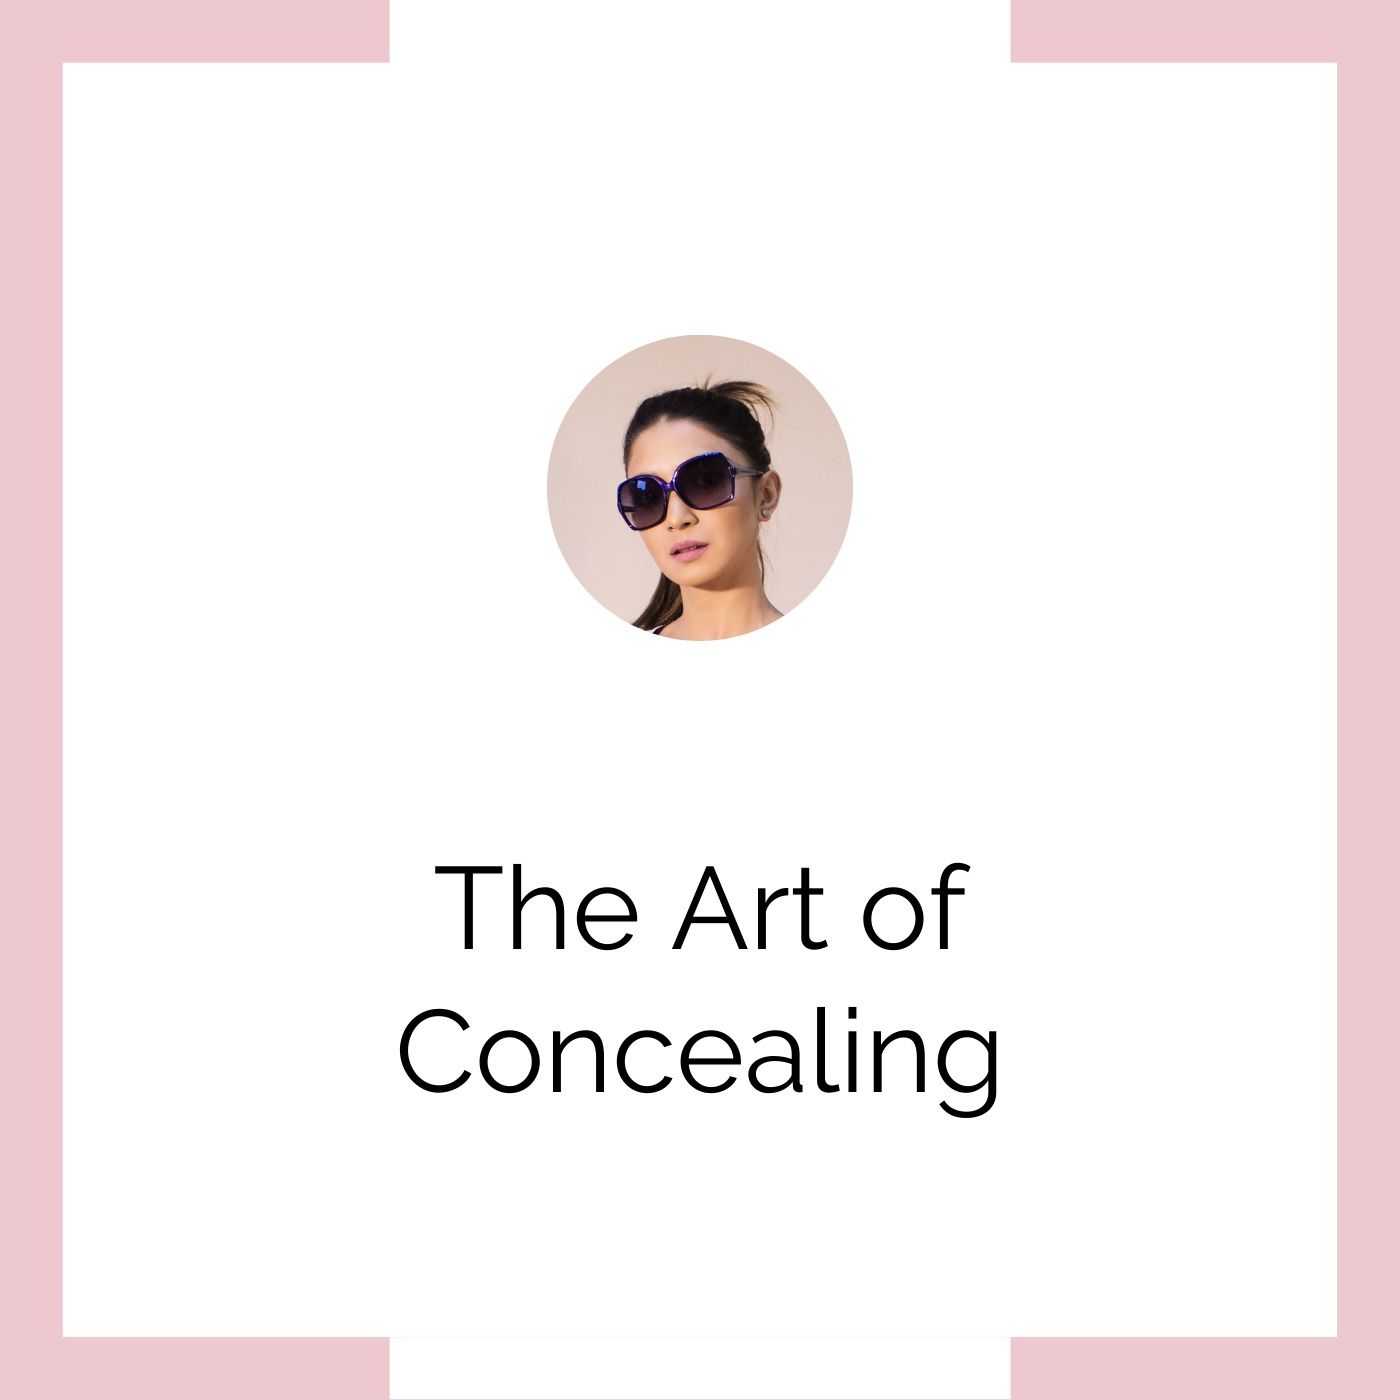 The Art of Concealing